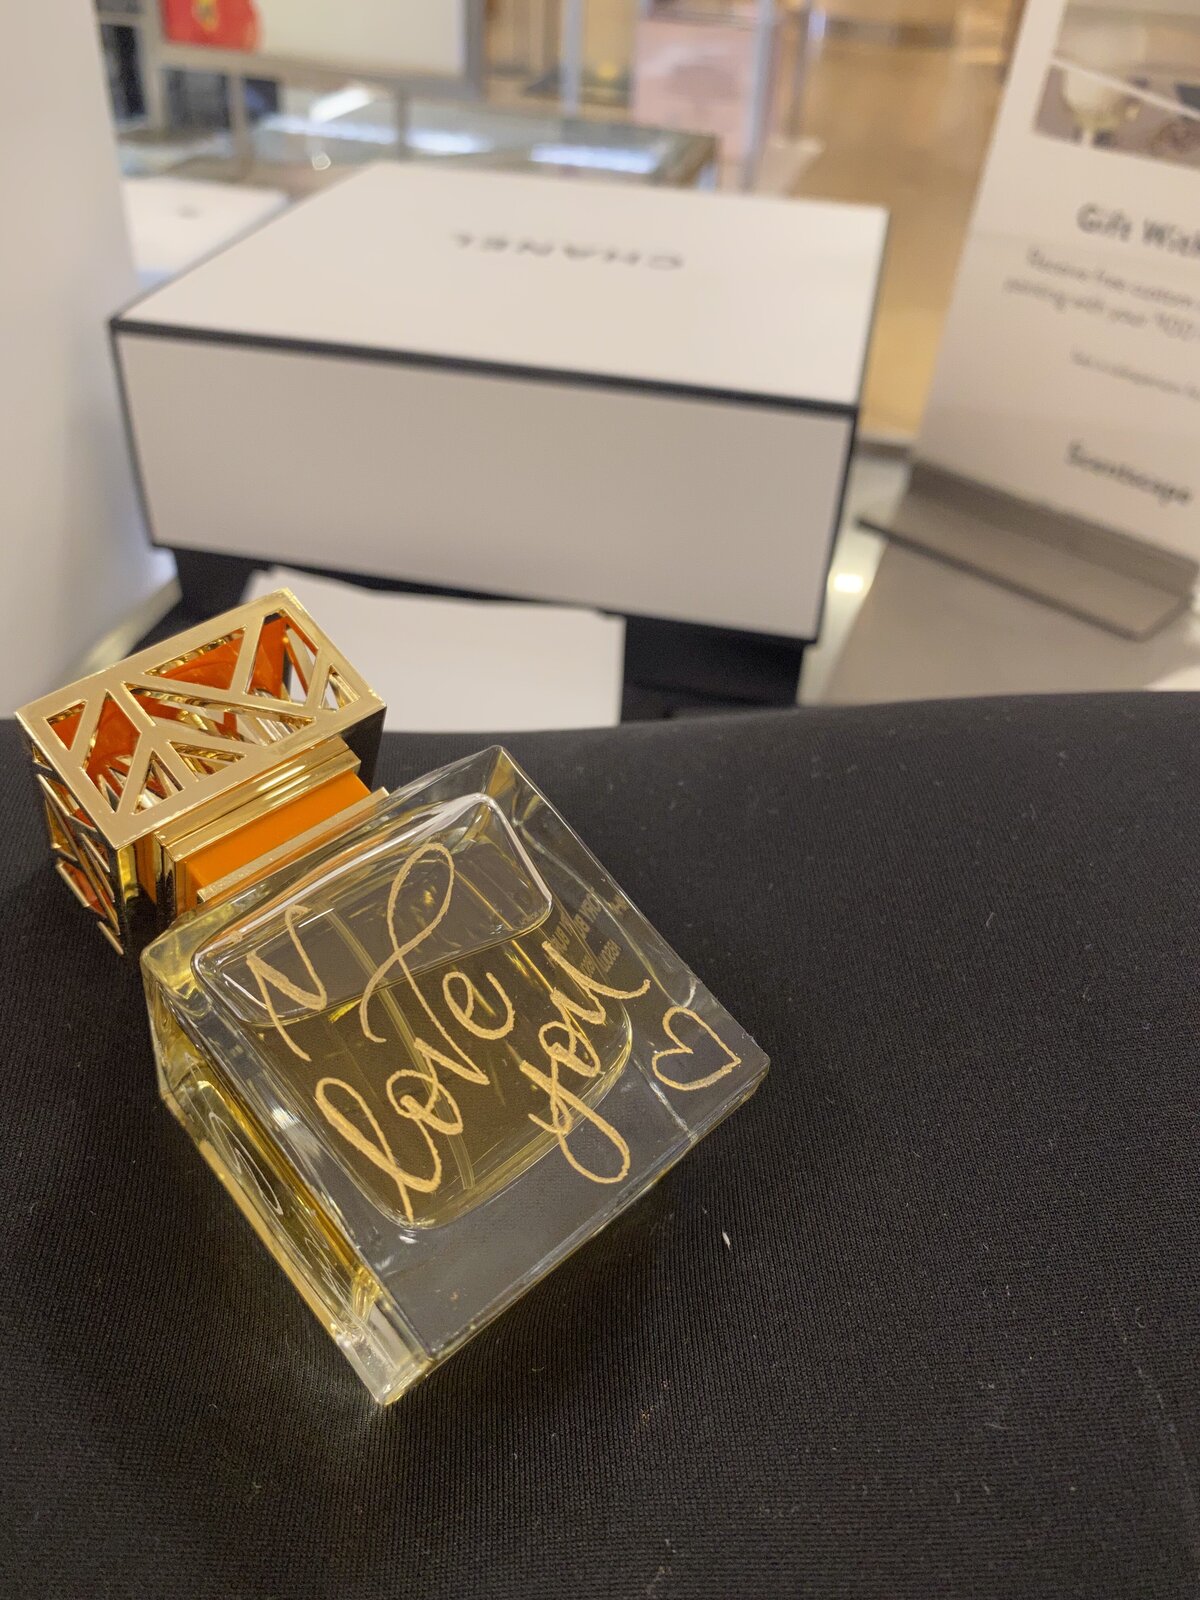 Brand Activation Live Event Tory Burch Calligraphy Engraved Perfume Los Angeles